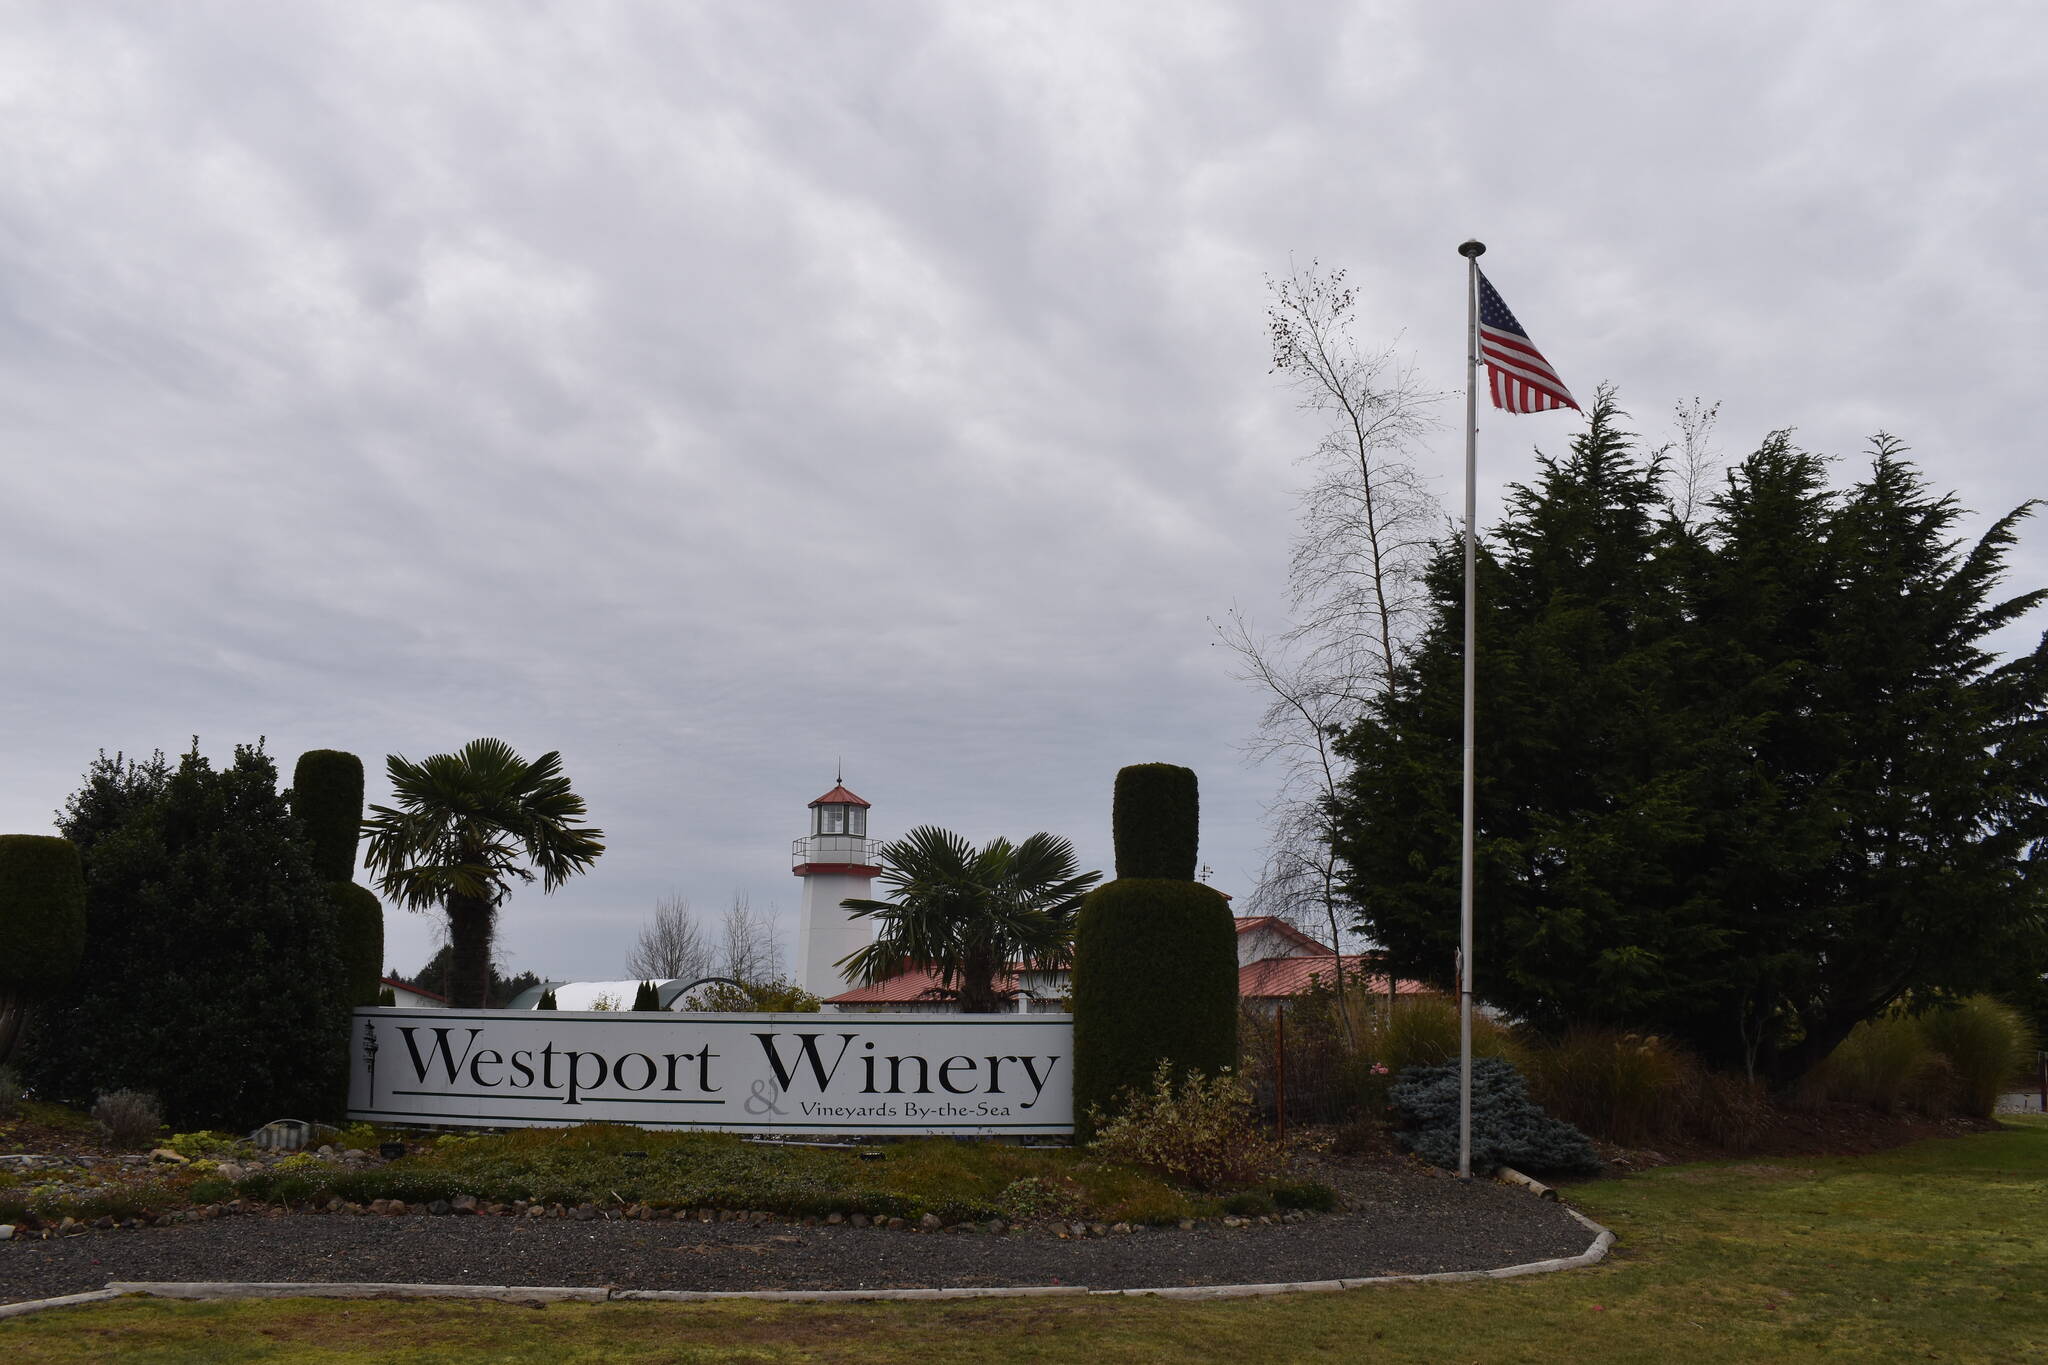 Matthew N. Wells / The Daily World
Westport Winery Garden Resort — 1 S. Arbor Rd., in Aberdeen — is home to many elements that make it a travel destination, including the award-winning Sea Glass Grill, Ocean’s Daughter Distillery, the International Mermaid Museum and its walkable garden.